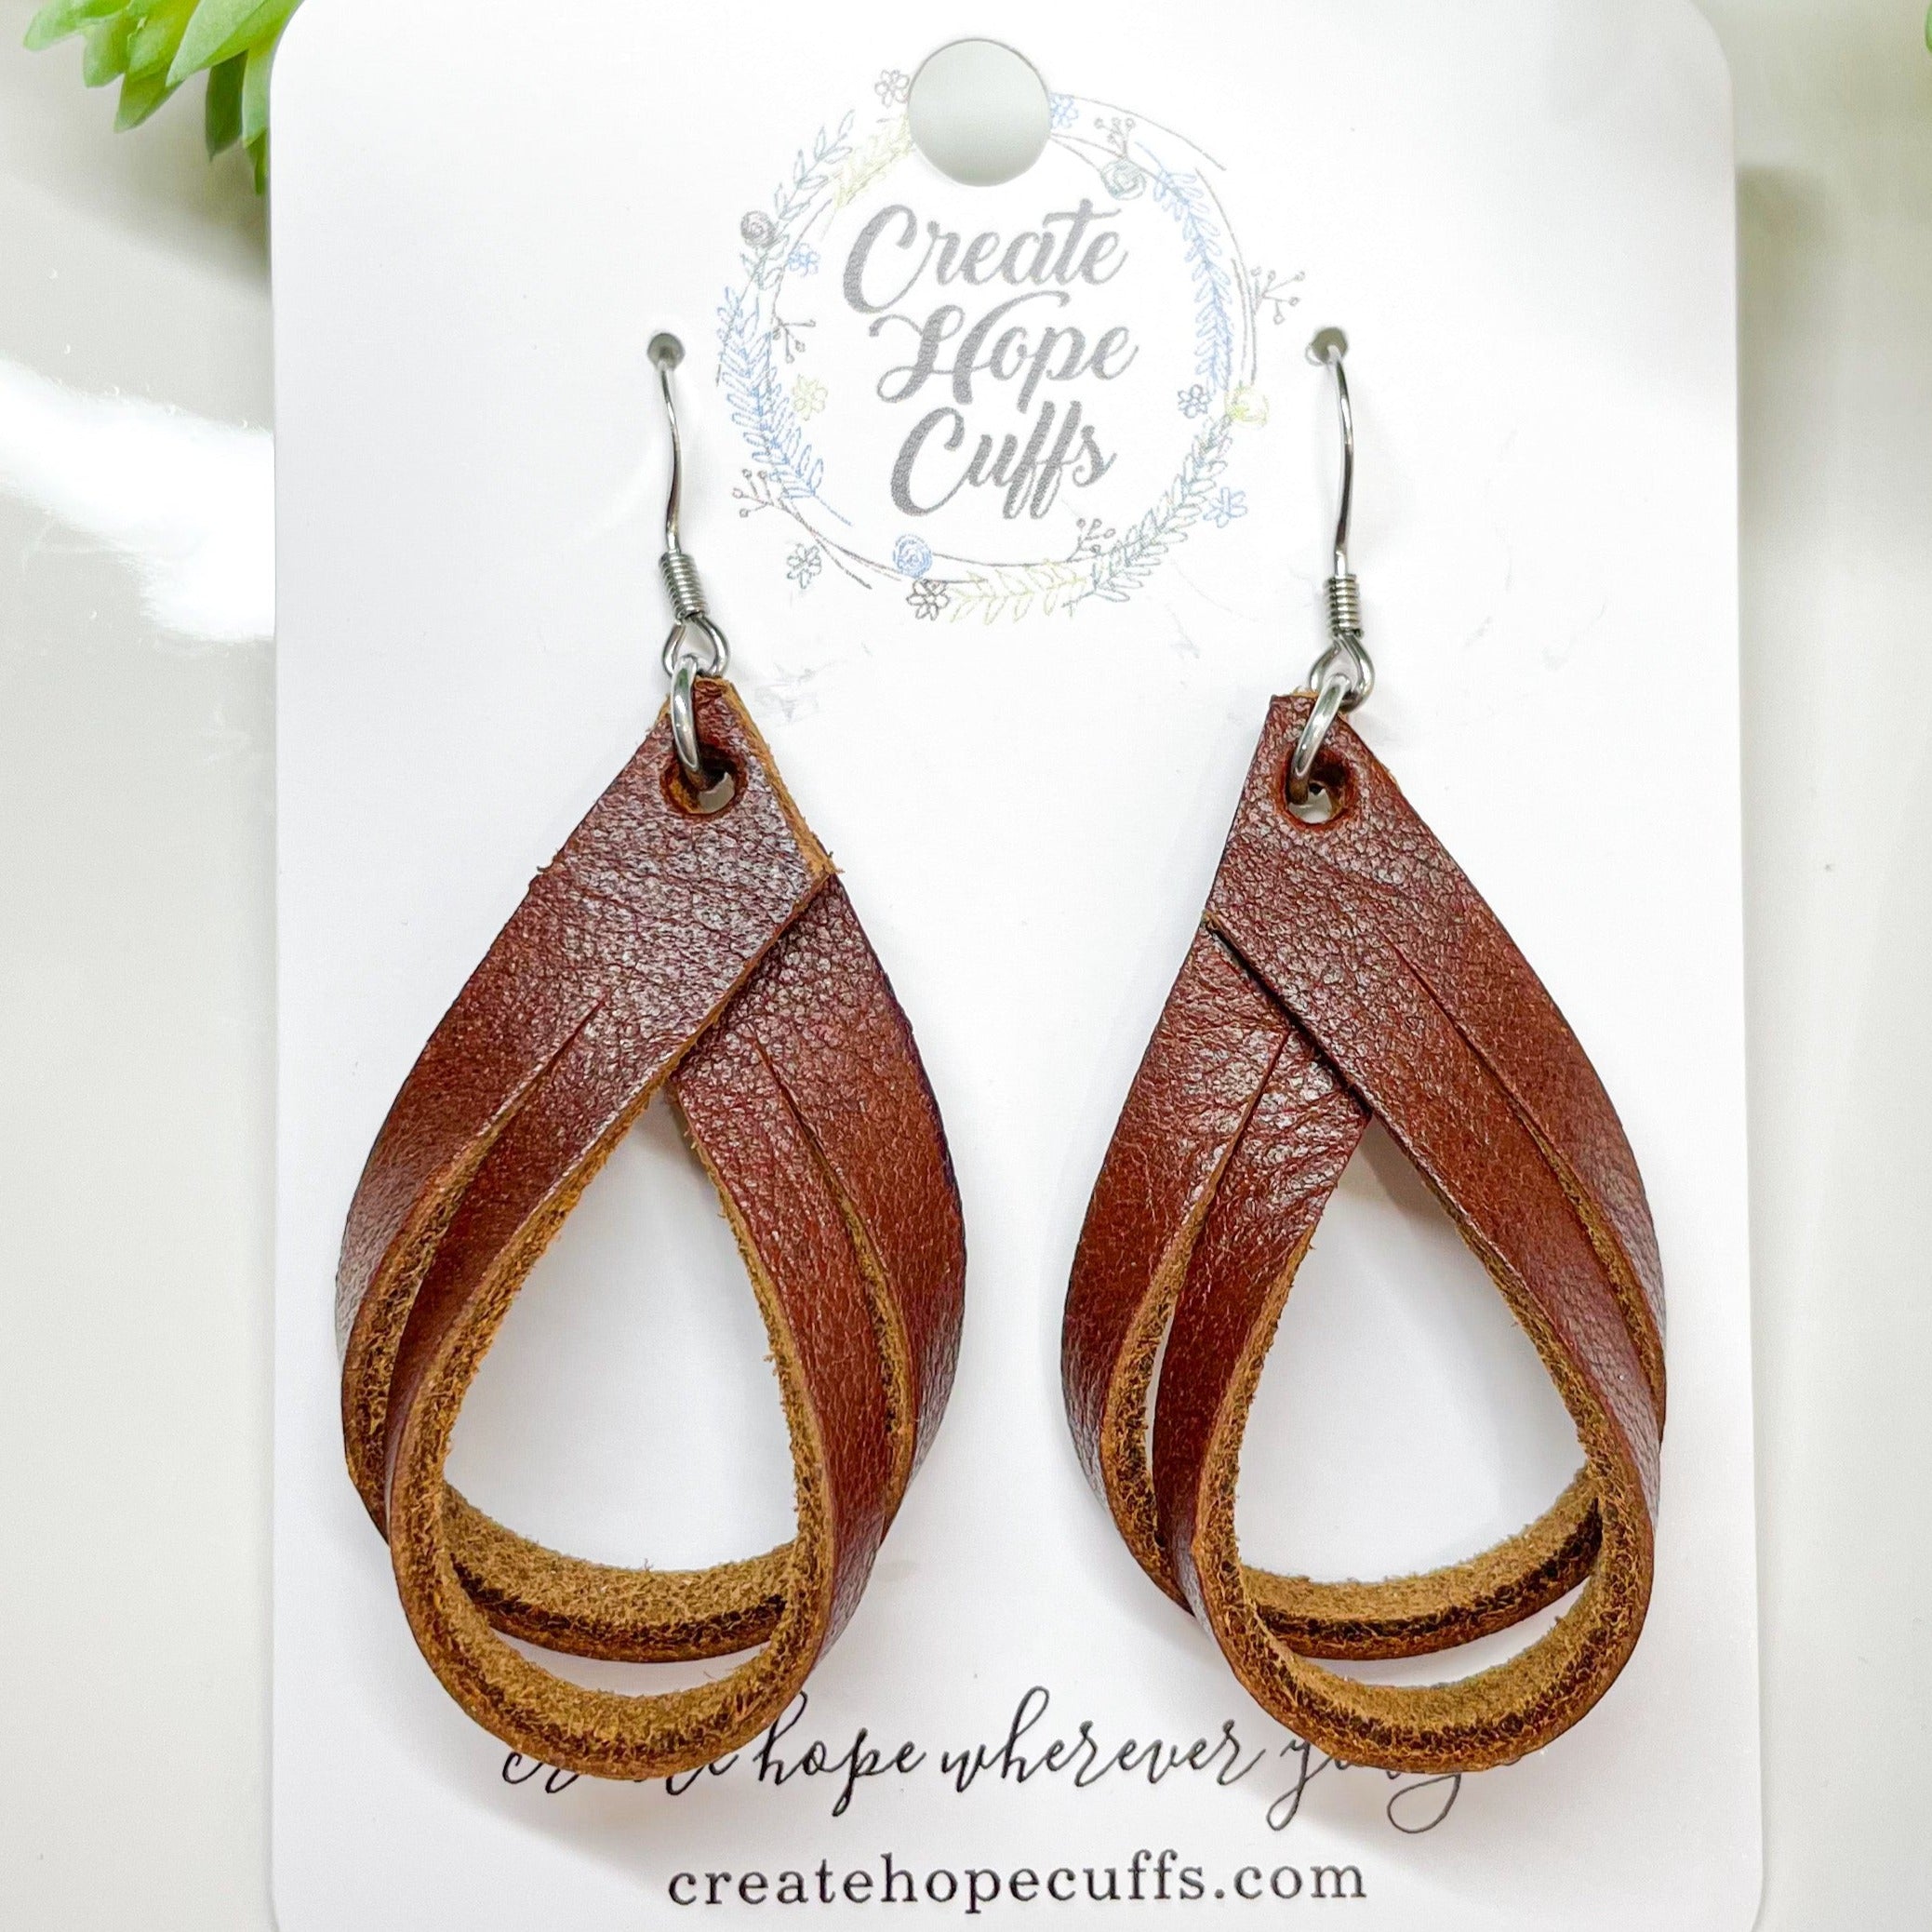 Double Loop Leather Earrings | 2 colors | Essential Oil Diffusers Leather Earrings Create Hope Cuffs Derby 